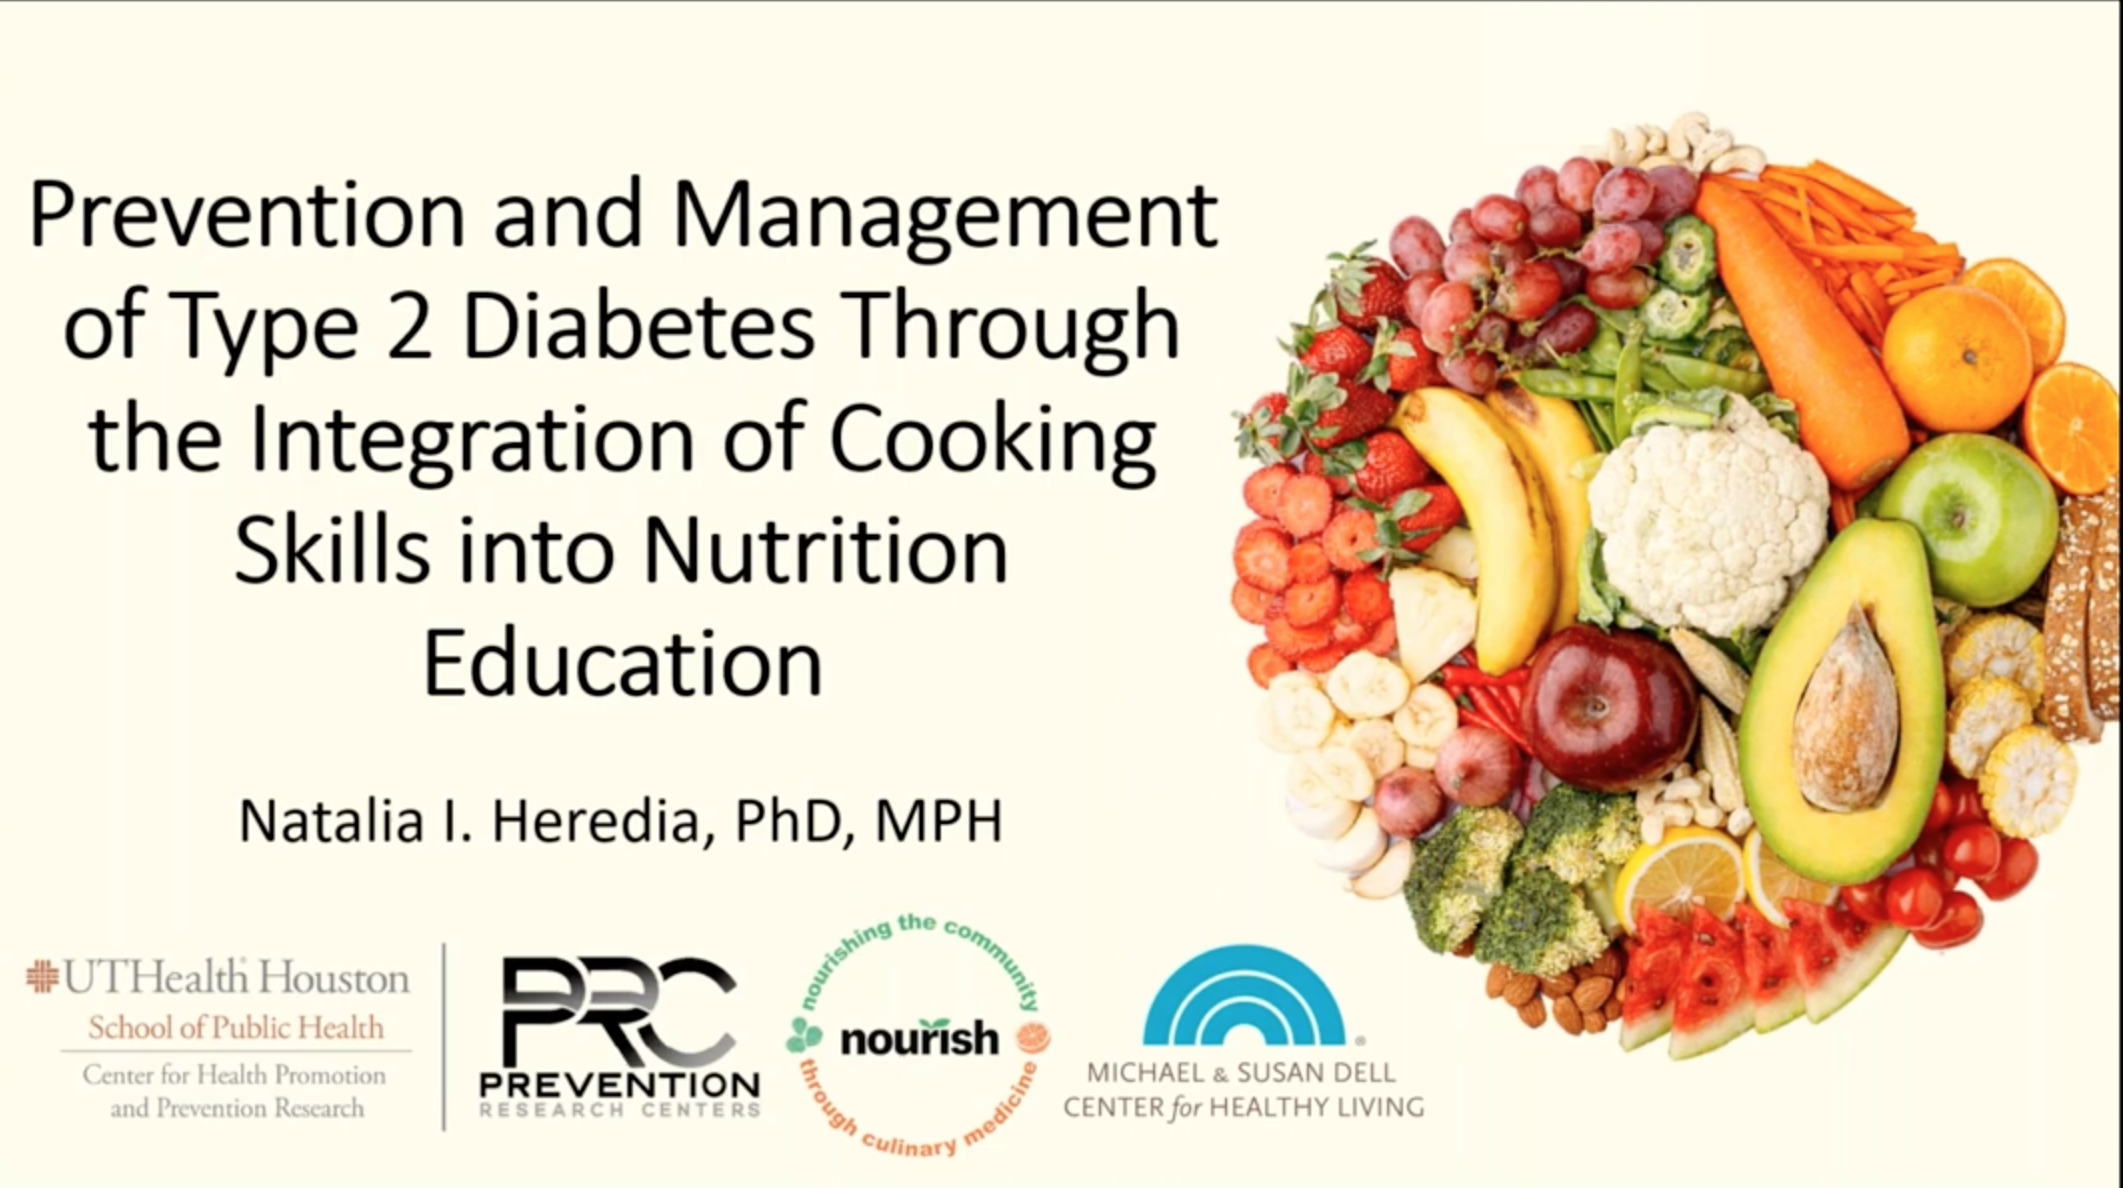 Integrating Cooking Skills into Nutrition Education to Prevent and Manage Type 2 Diabetes2.png